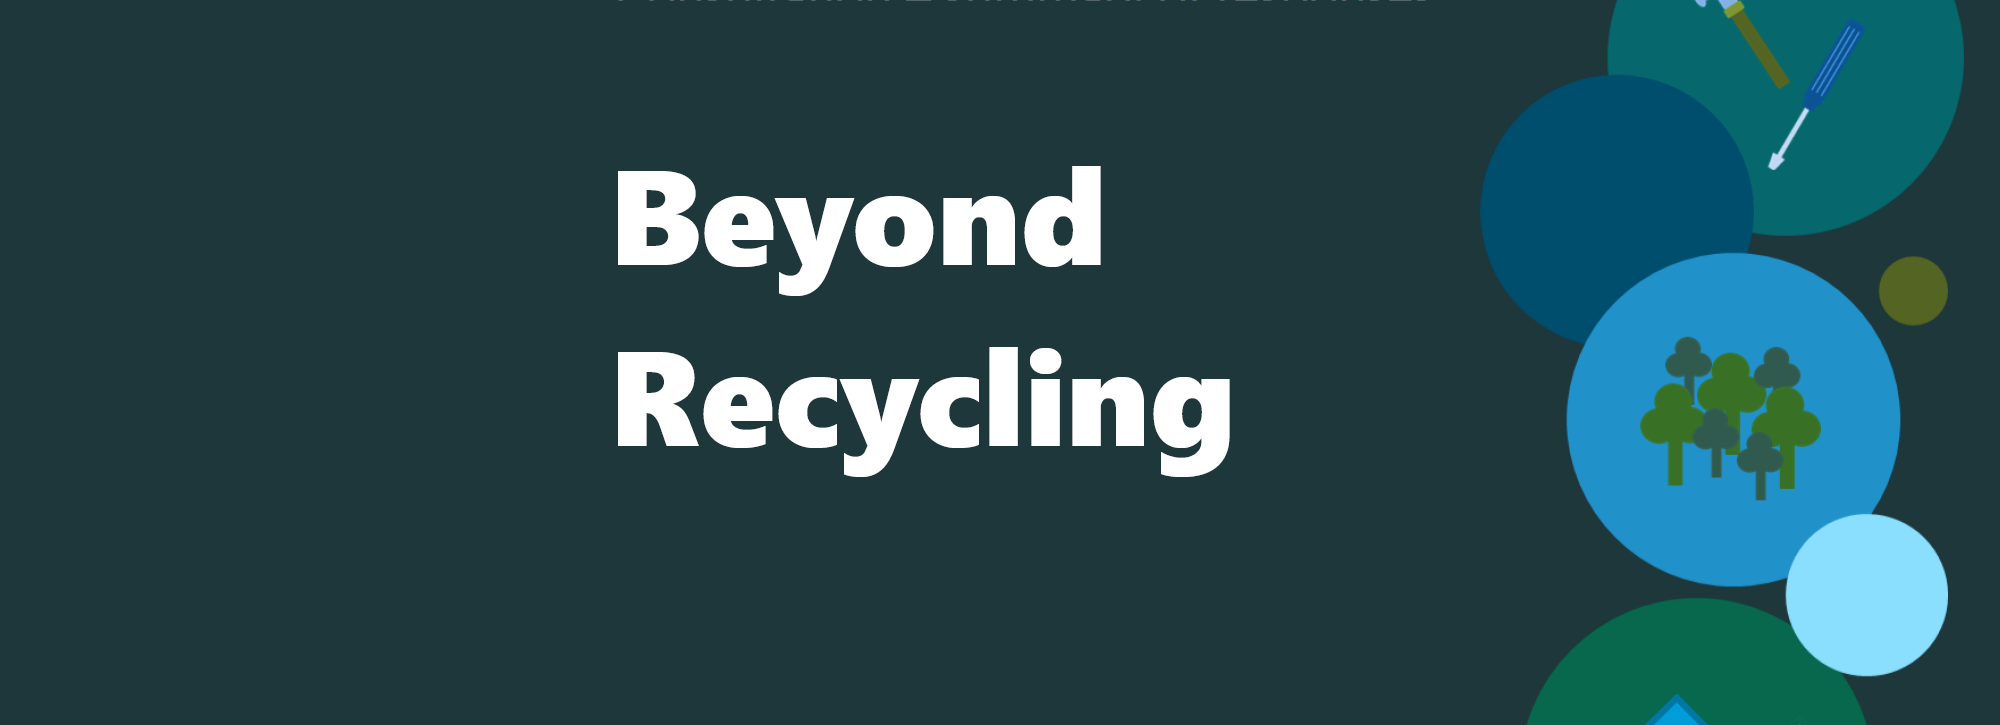 Cover of the Beyond Recycling summary with title in white on dark background and a number of service-related icons in coloured circles along the right-hand edge.